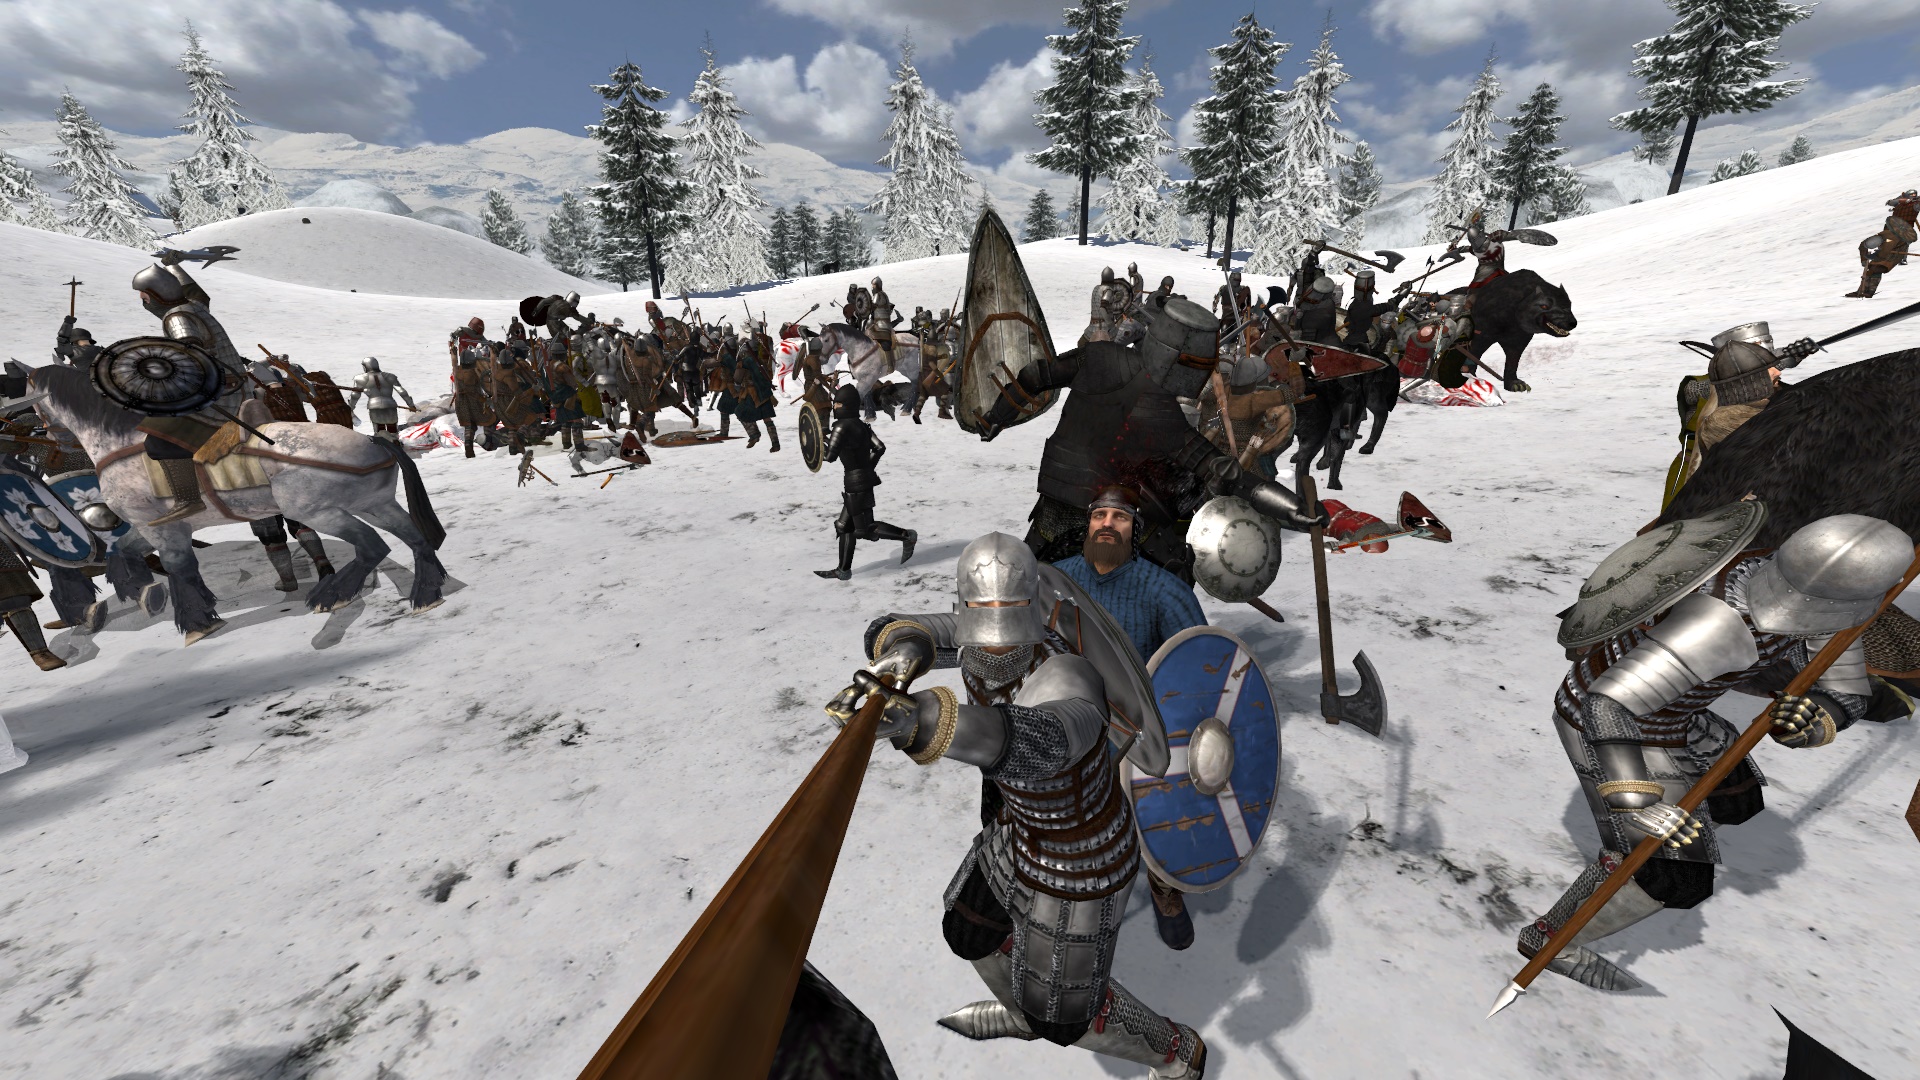 mount and blade warband mod fantasy